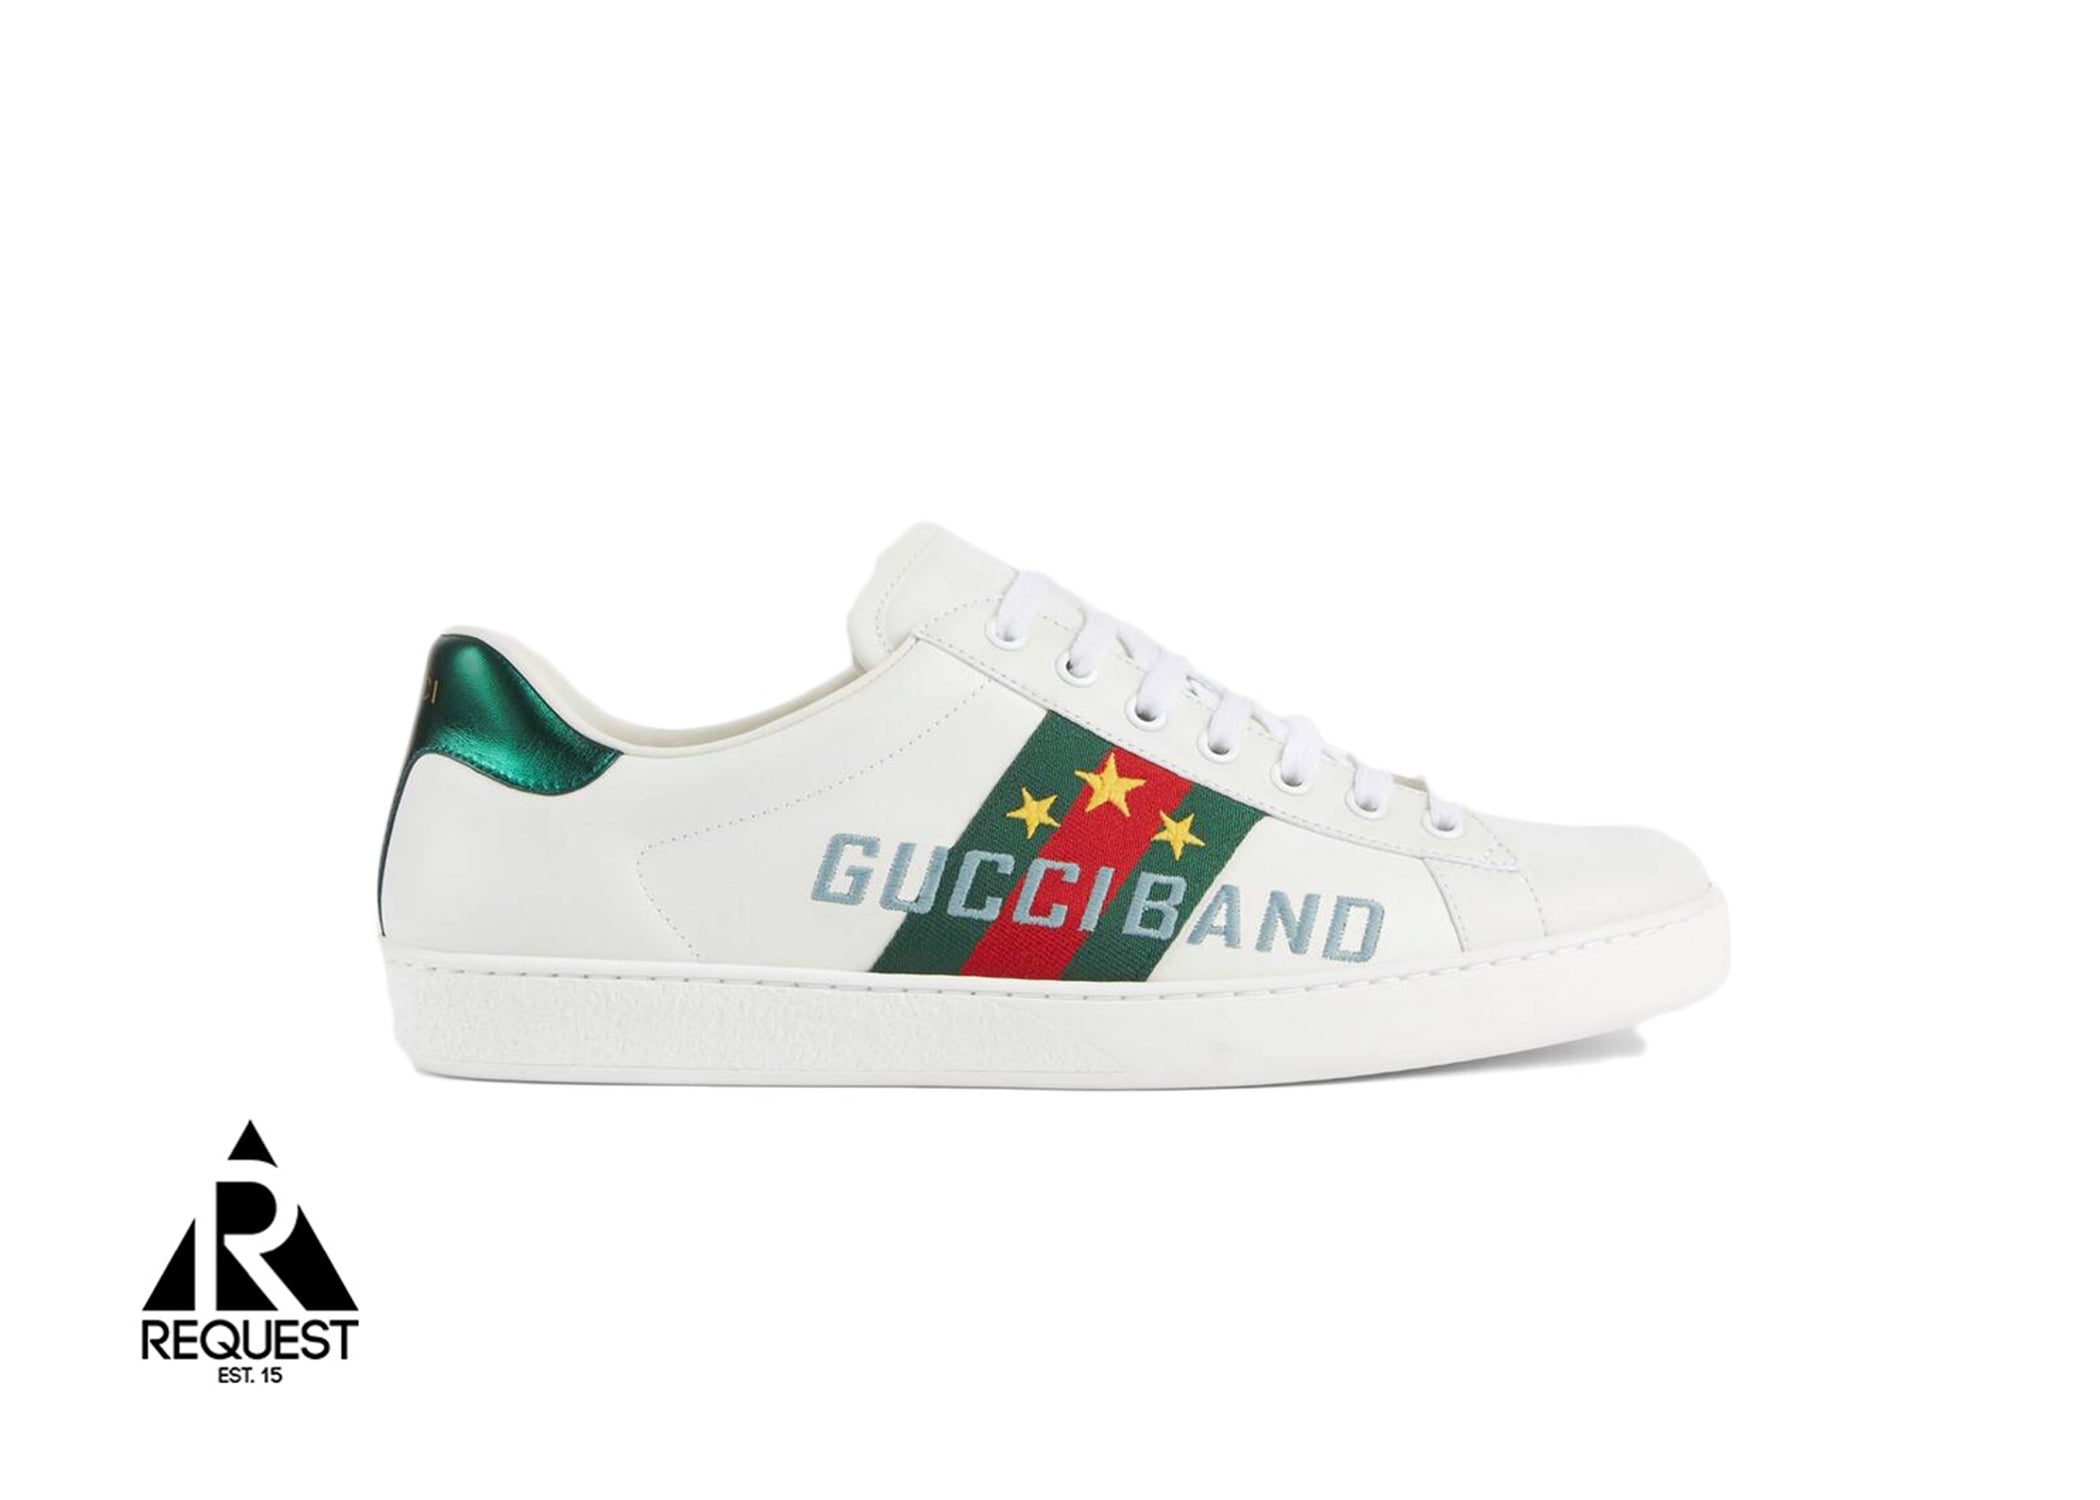 Gucci Ace Low “Gucci Band”